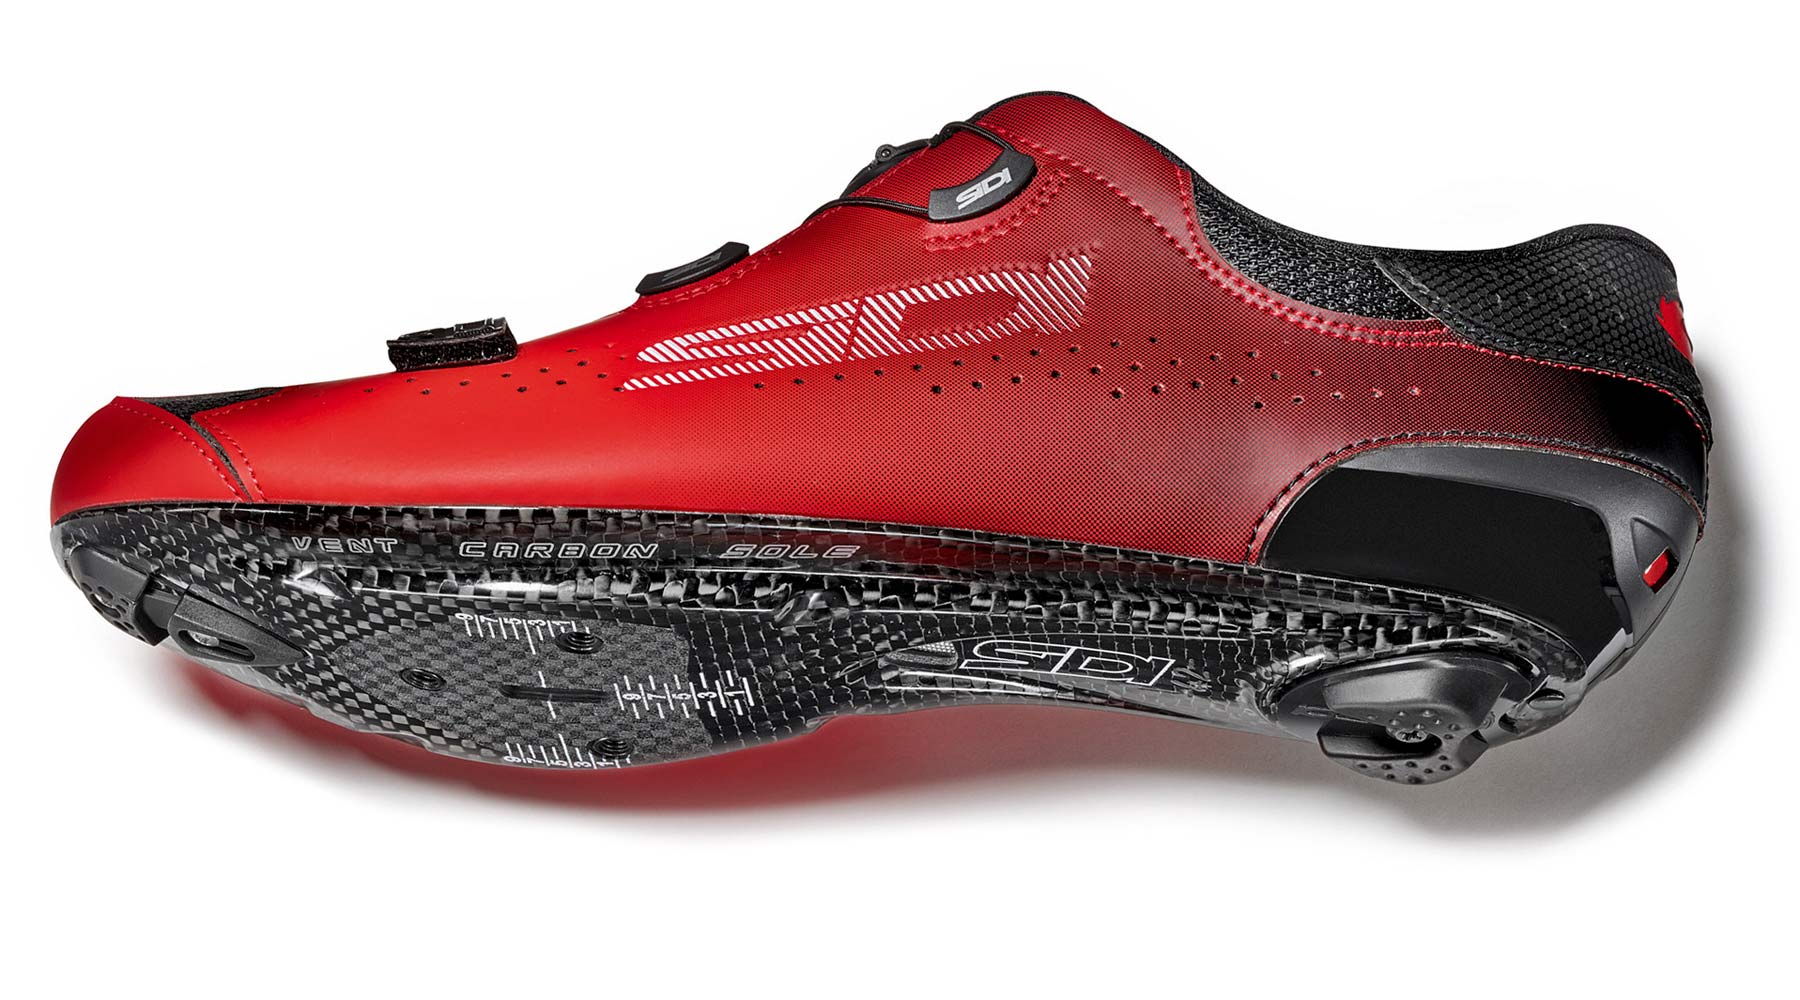 2020-Sidi-Sixty-carbon-road-shoes_lightweight-high-performance-carbon-sole-road-bike-shoes-Sidi-60th-anniversary-edition_Vent-Carbon-Sole.jpg